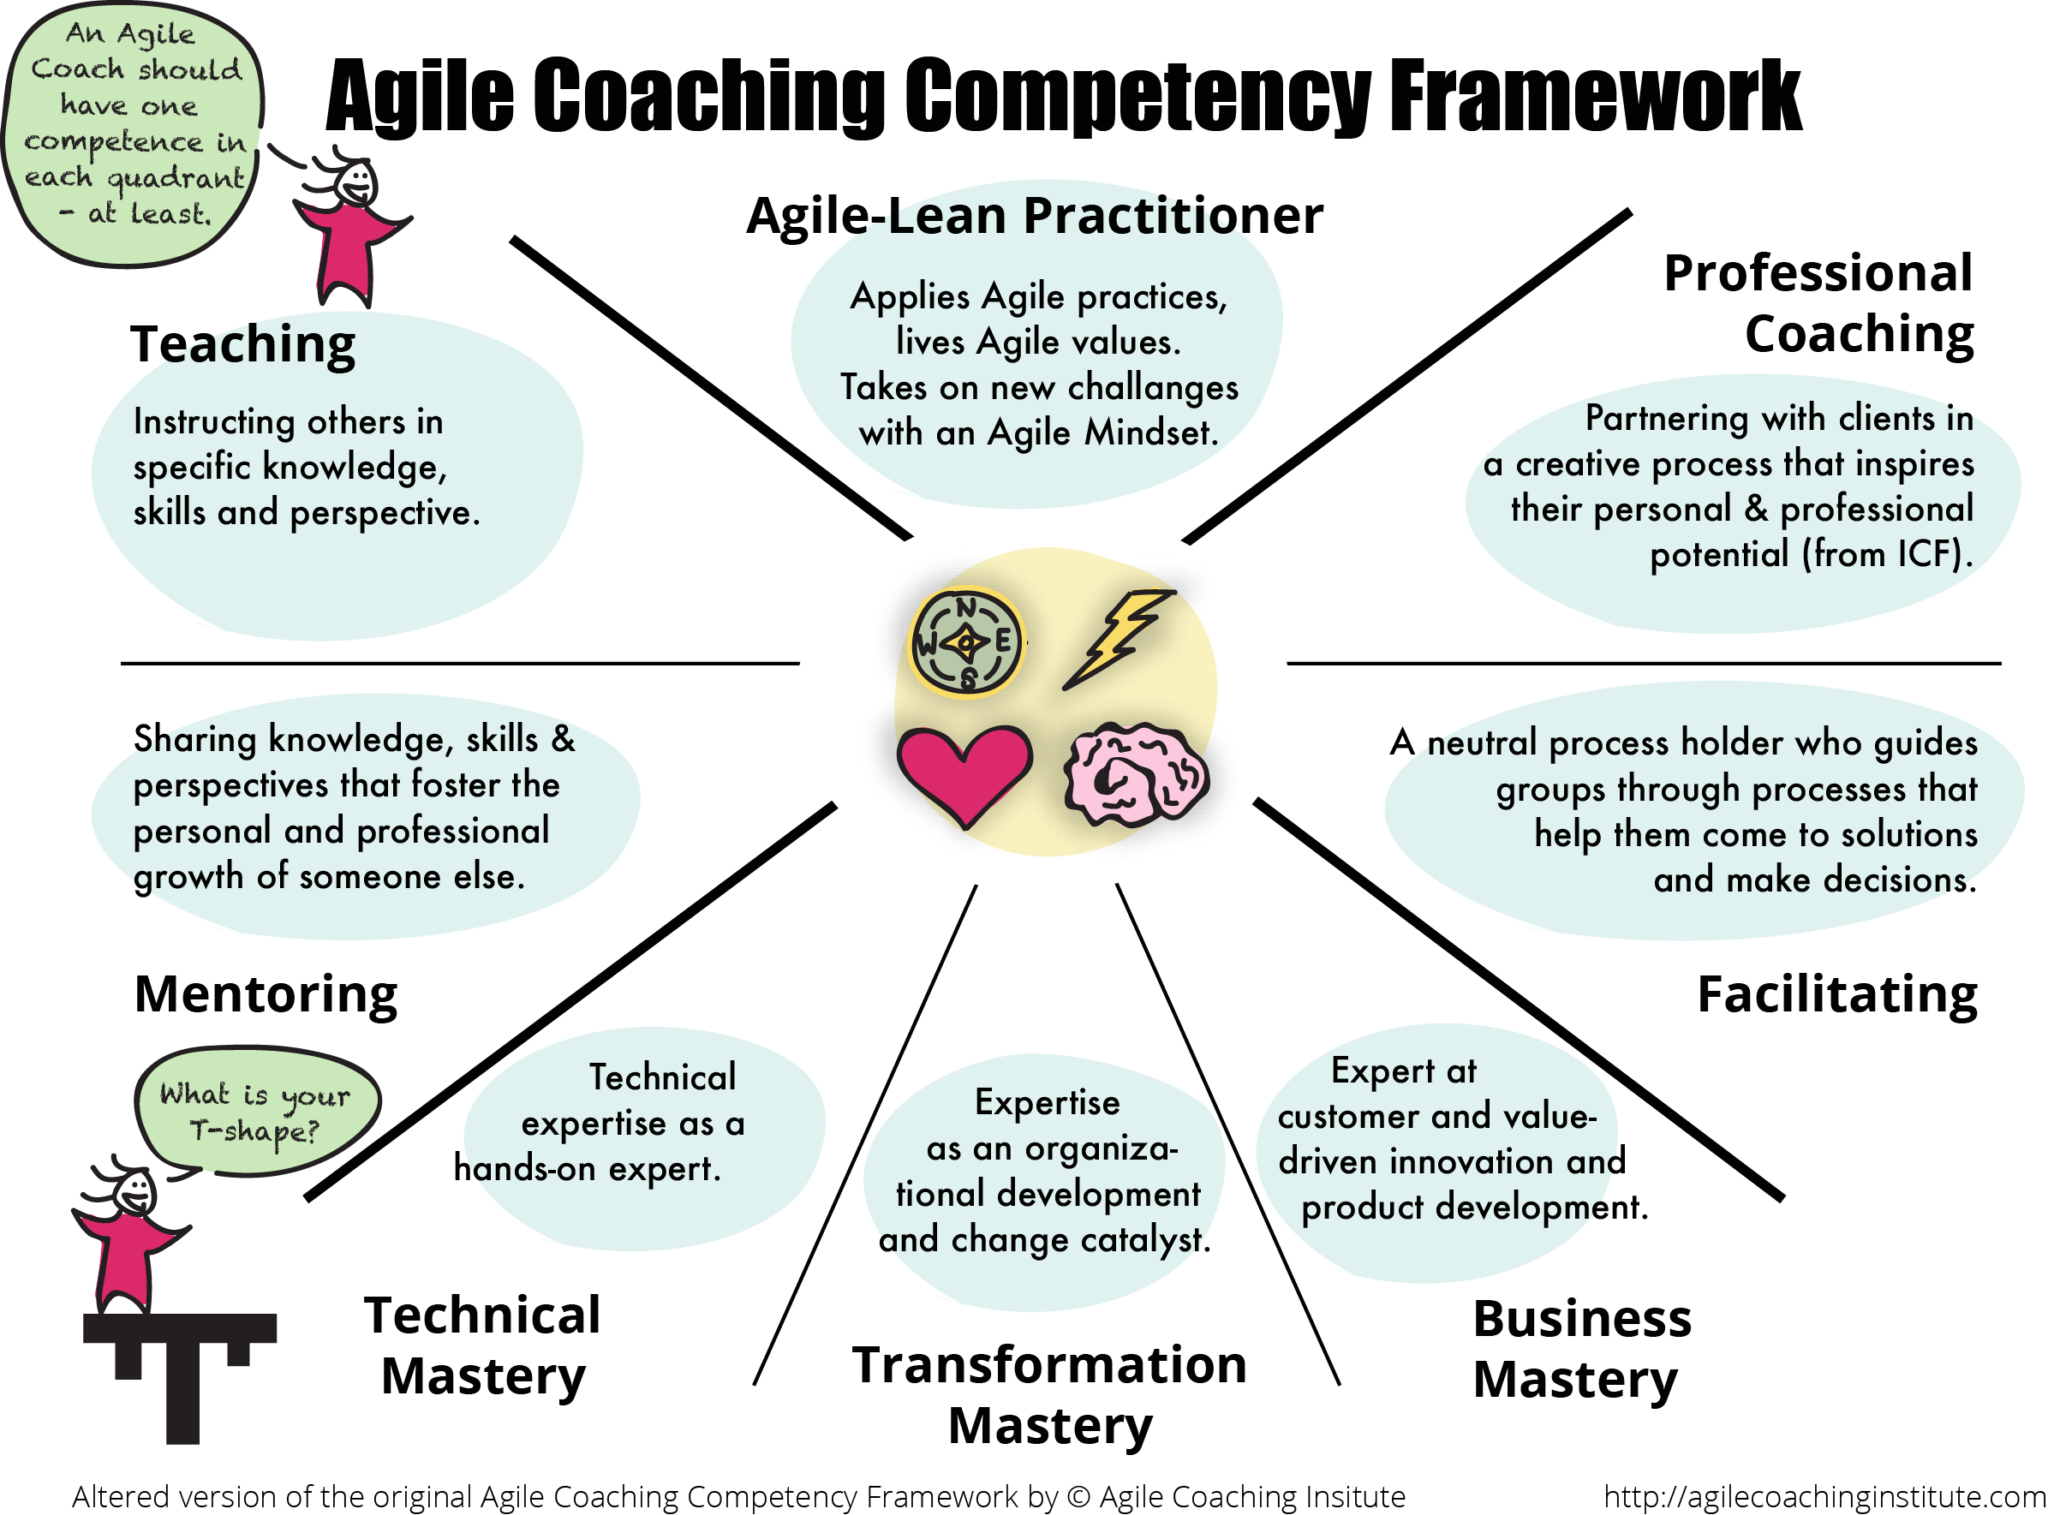 What Is An Agile Coach Overview - Bank2home.com